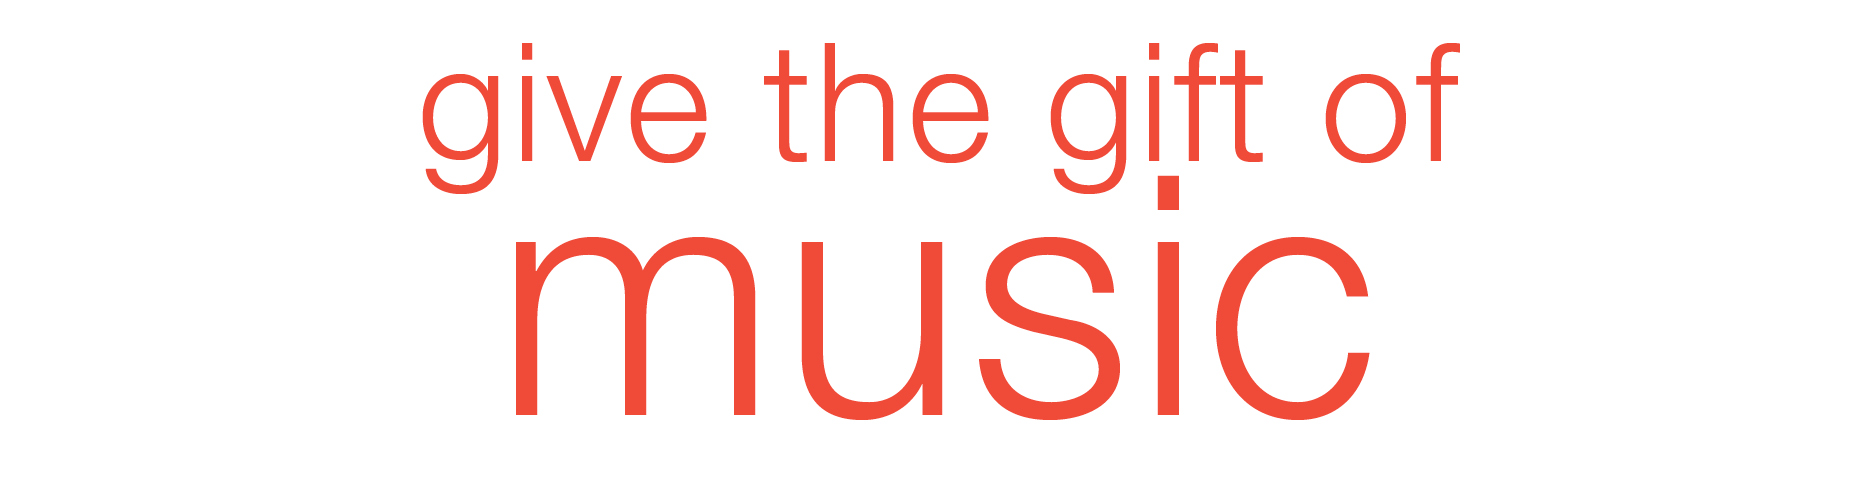 Give the gift of MUSIC